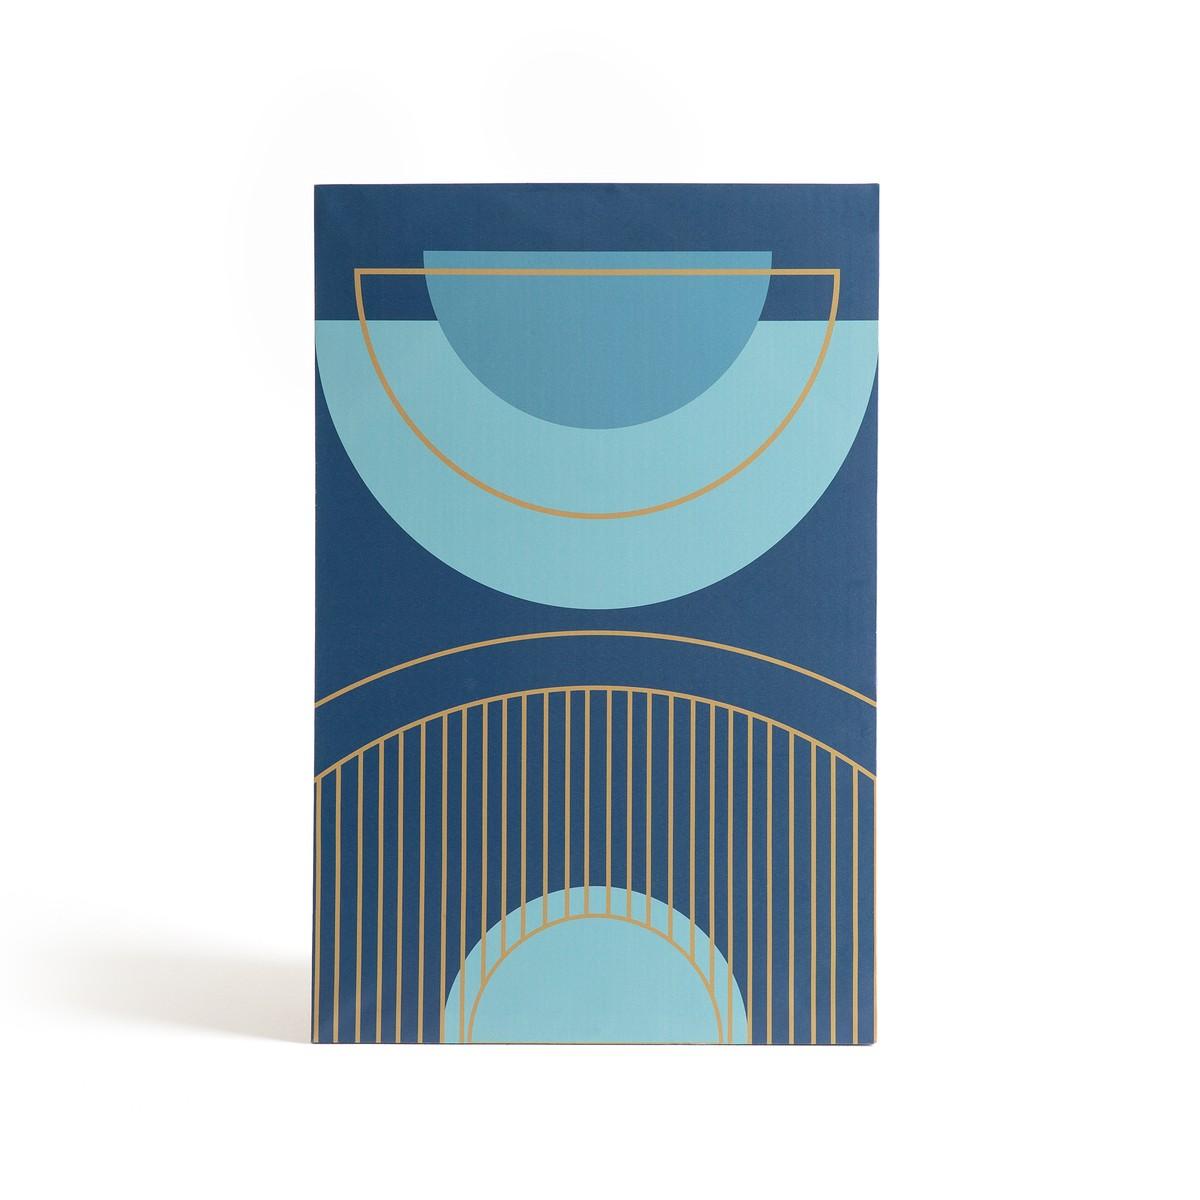 This £15 Art deco print in blue and gold is the perfect to complement a navy and green living room| Today we're talking inspiration for adding green to your living room. Green is a really versatile colour to decorate your home with. But, which colours and tones work well? What kind of accessories work with green? This post gives you ideas for pulling together an elegant green colour palette and pieces for your home. Read more: kittyandb.com #greenlivingroom #greenaccessories #bluecolorpalette #goldaccessories #interiordecoratinginspiration #blueaesthetic #blueandgold #artdeco #wallart